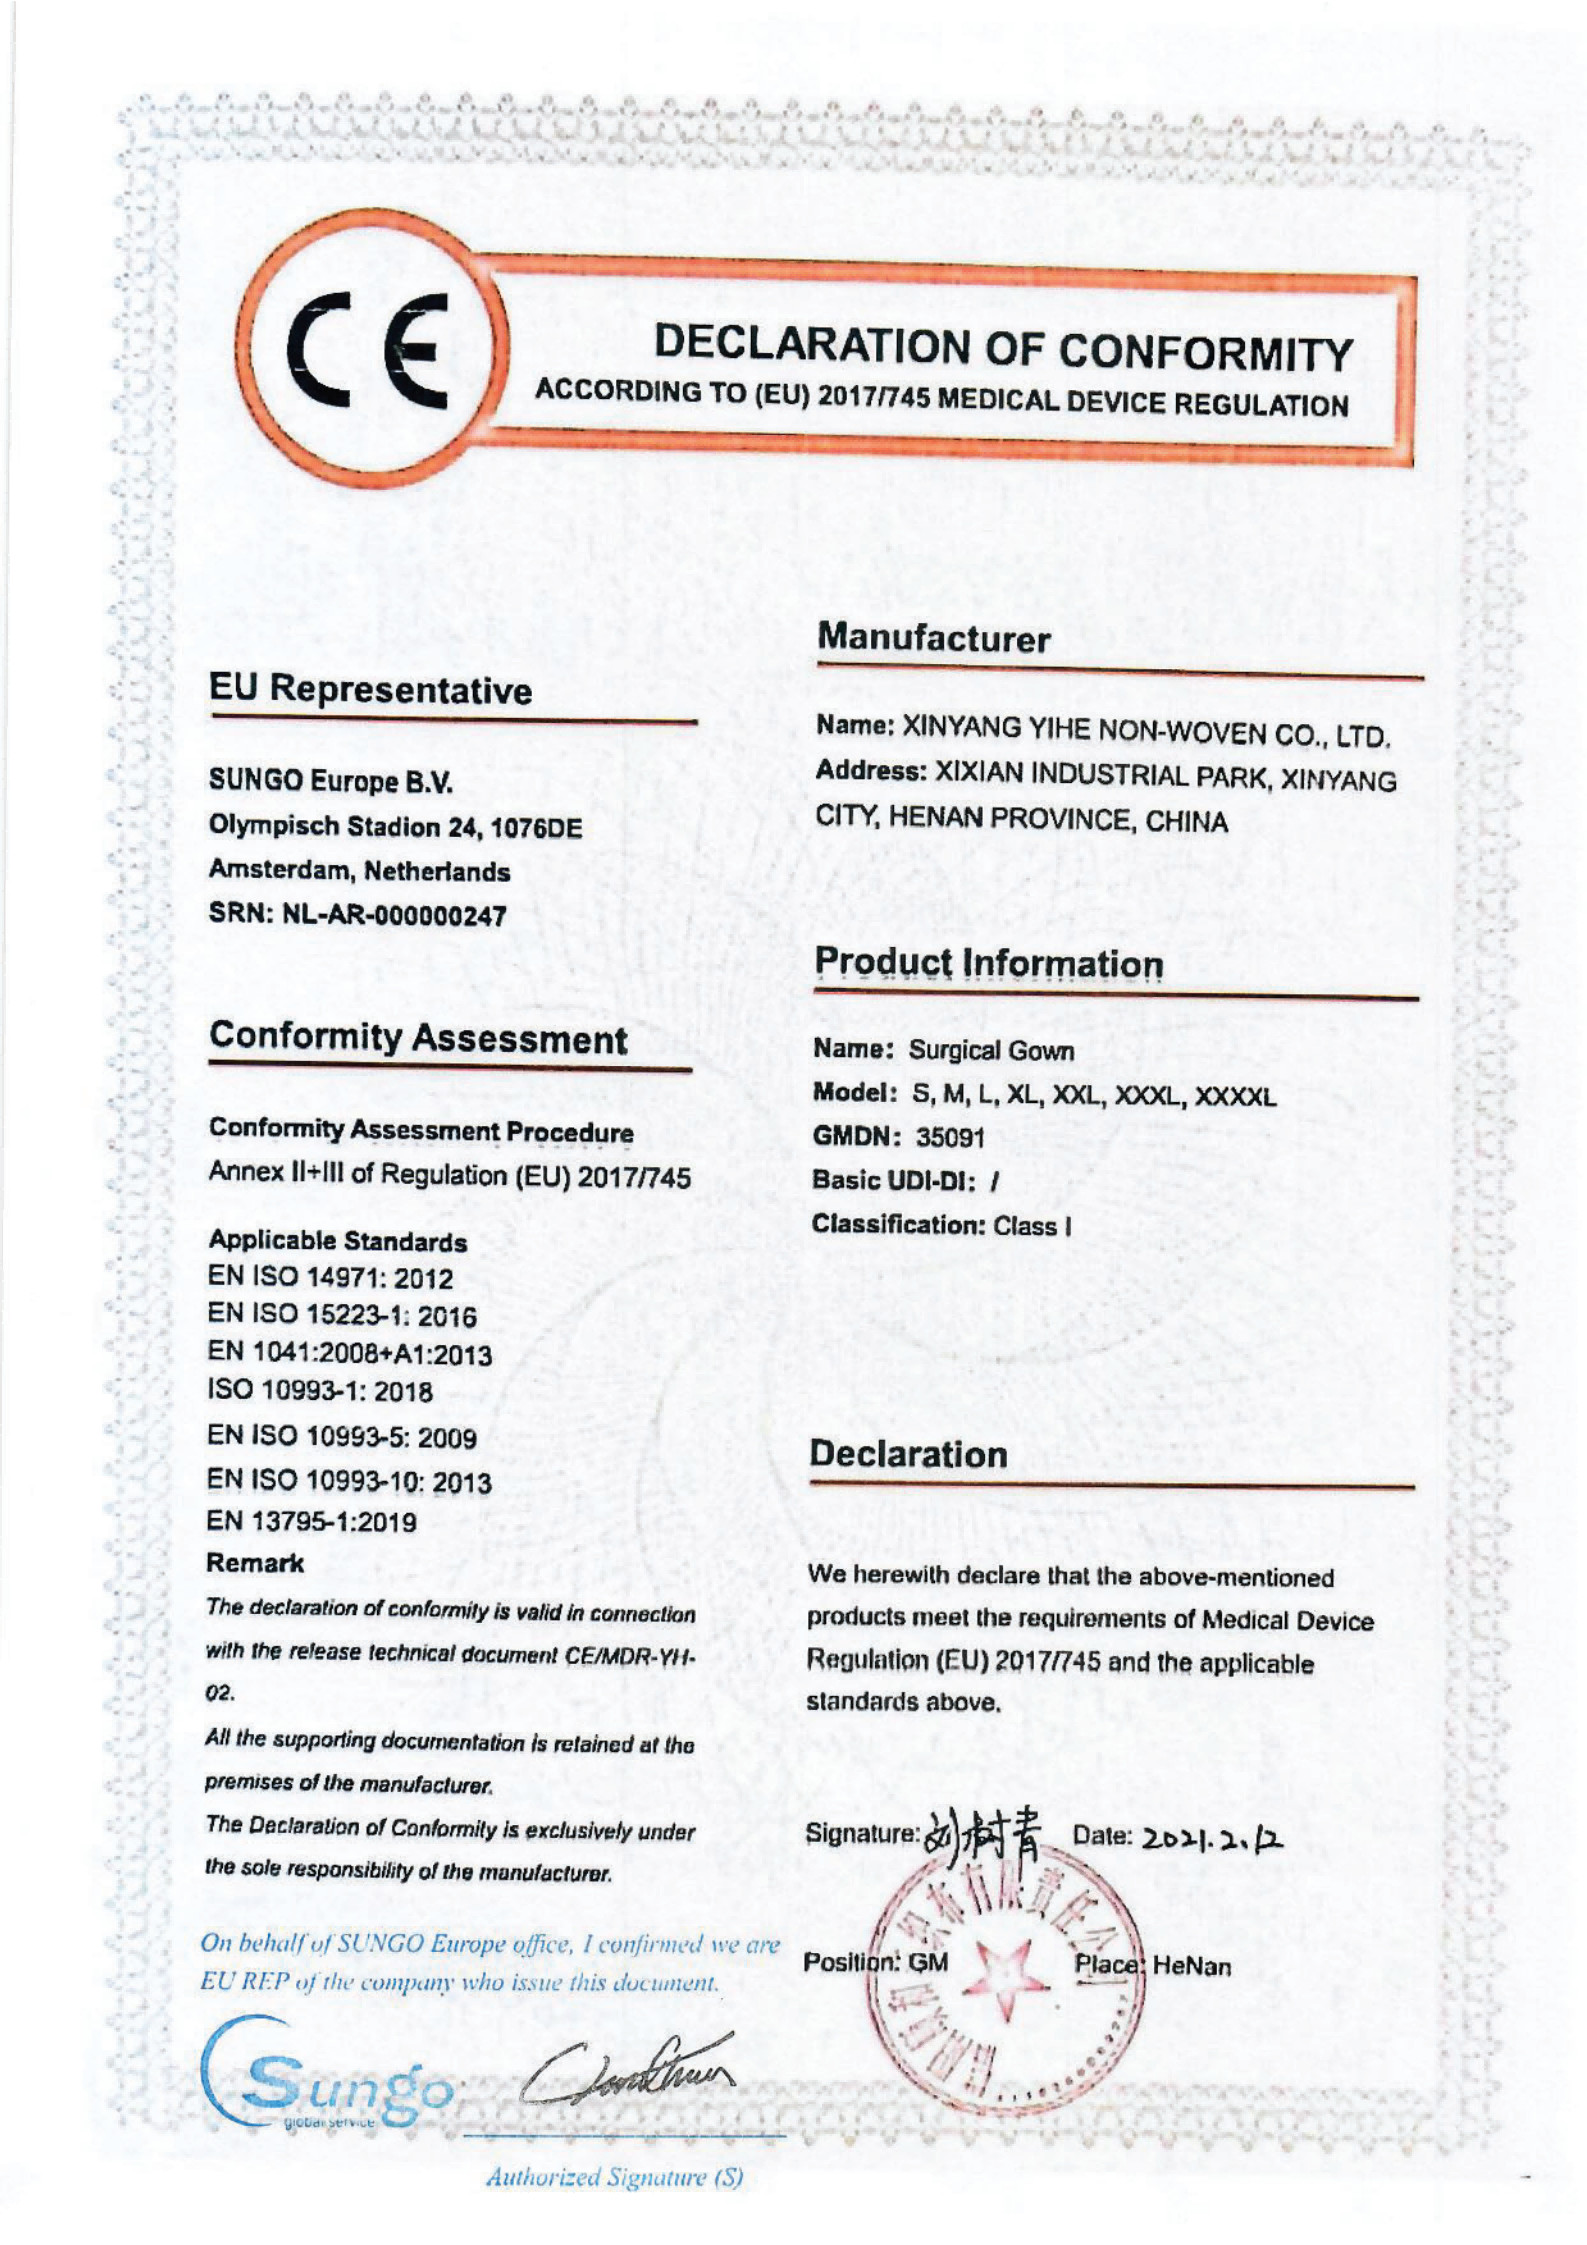 Xinyang Yihe Non-Woven Co., Ltd. Certifications